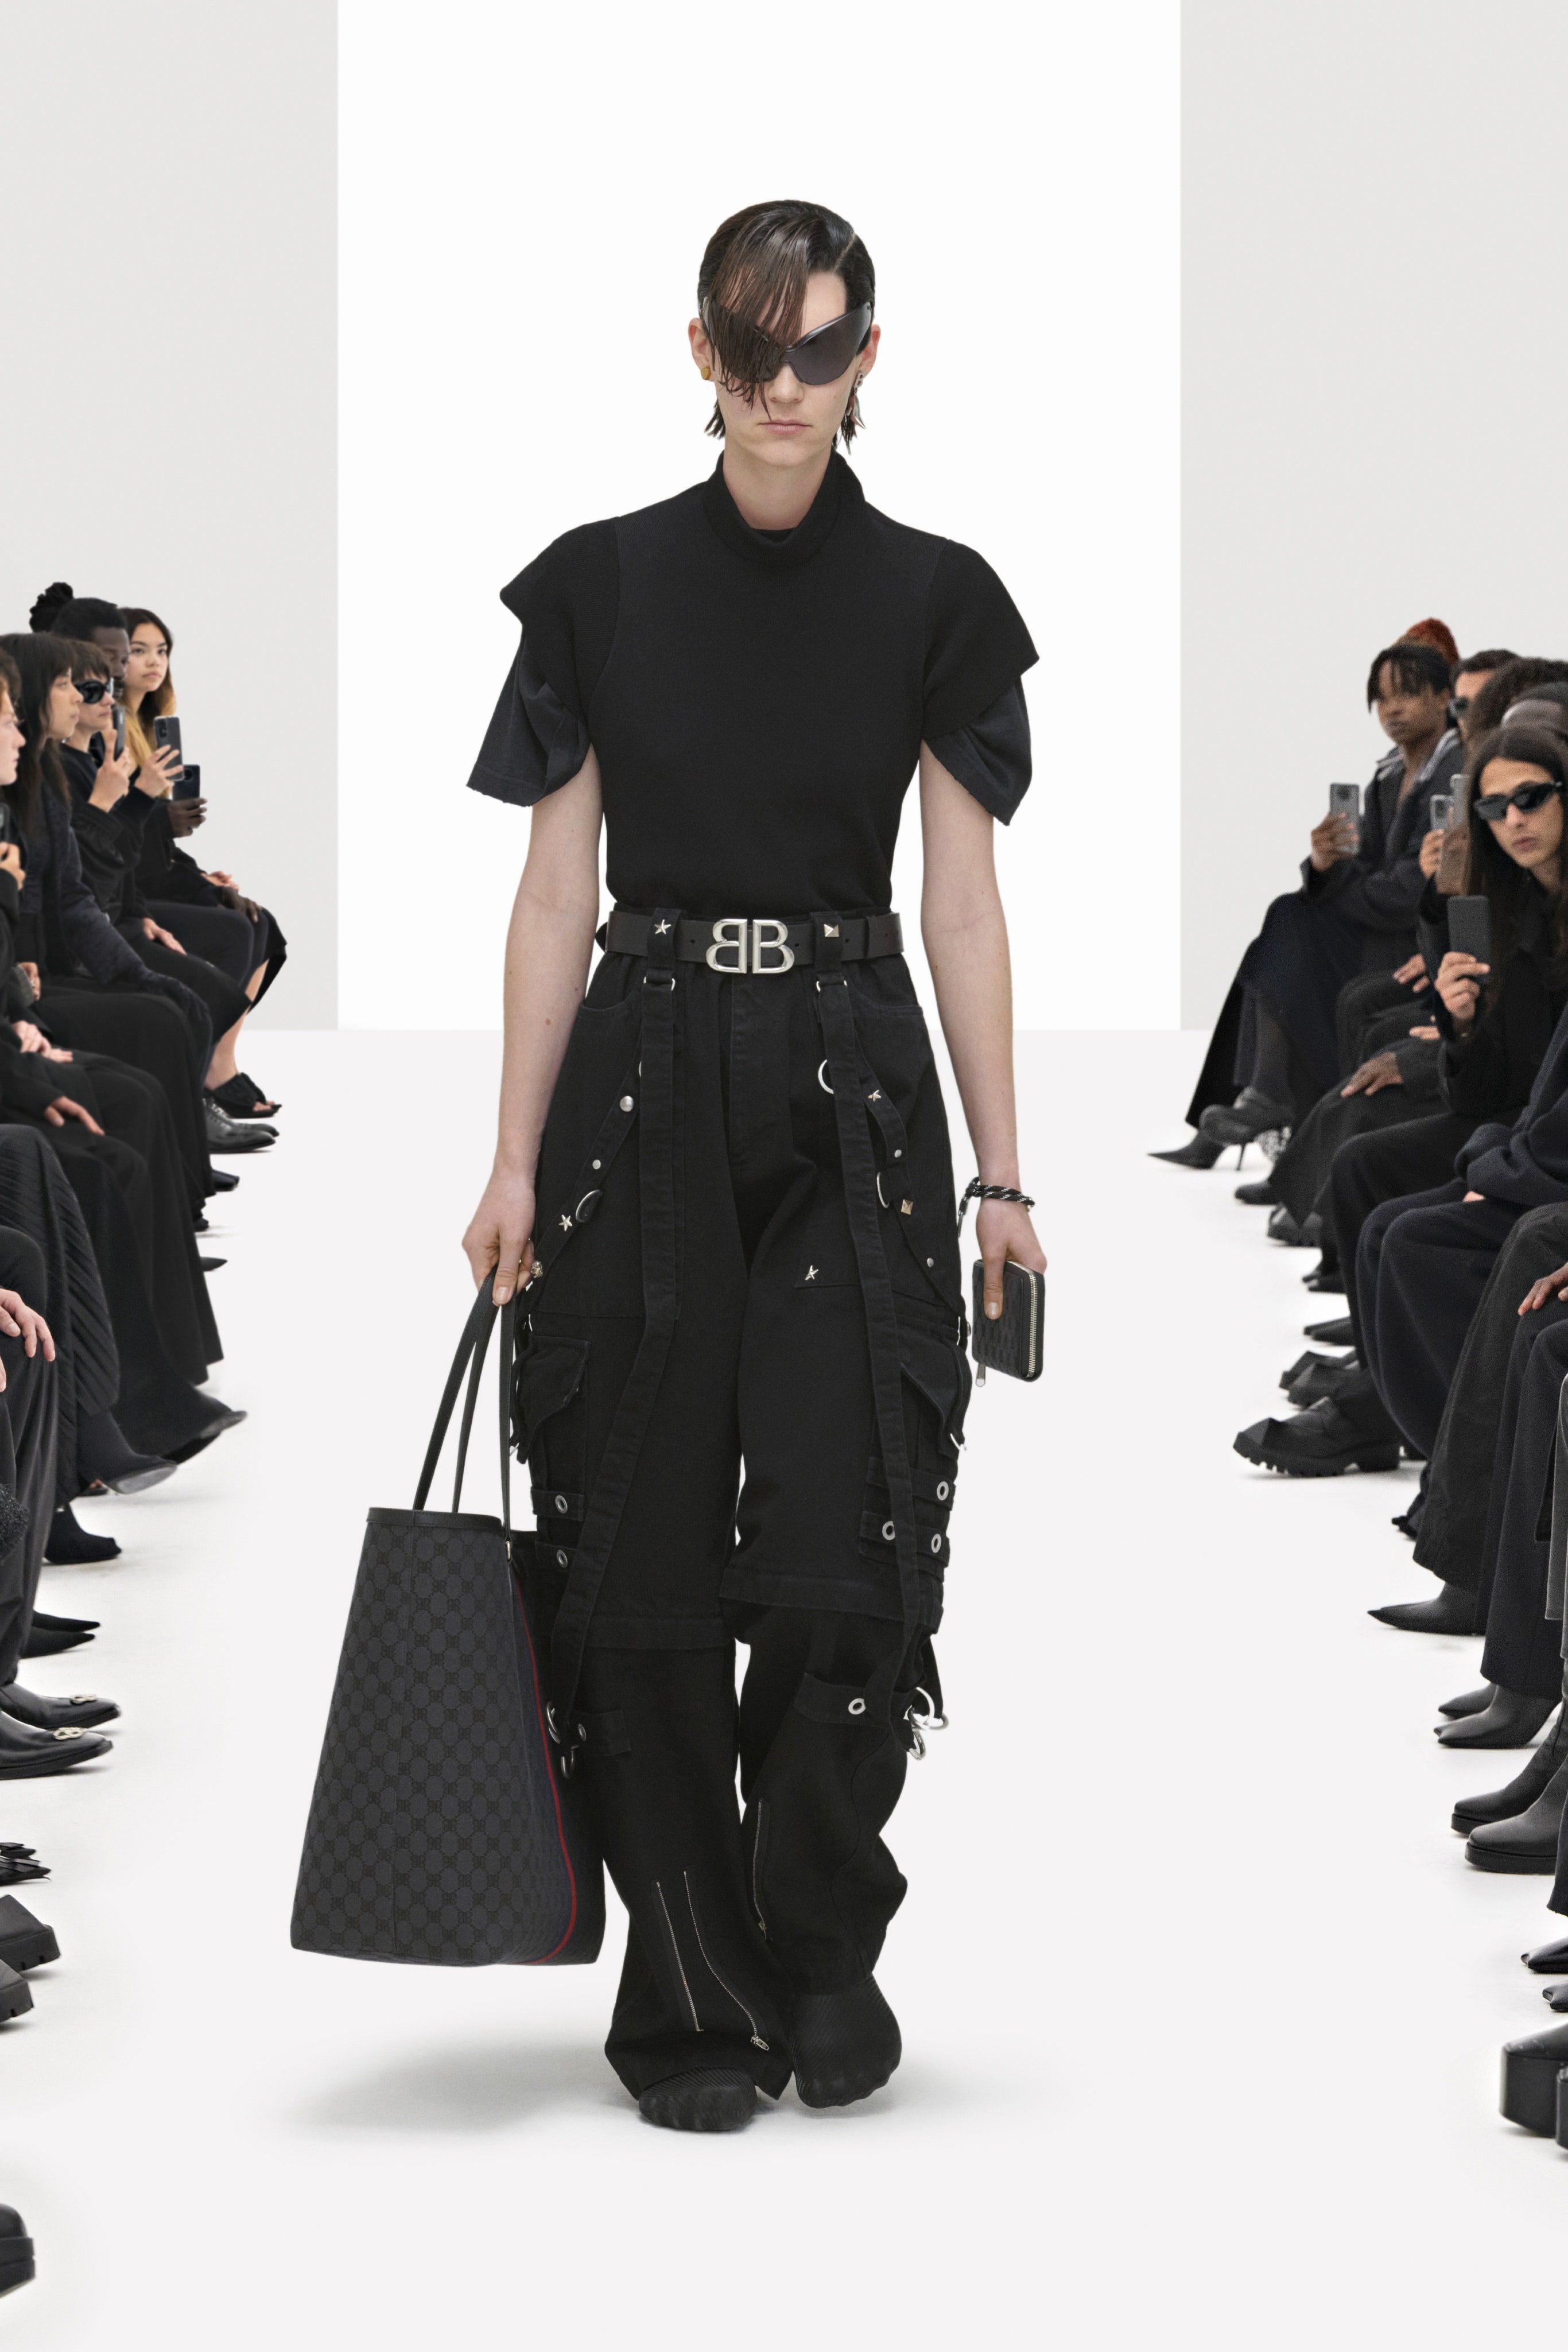 marionet Overvåge nationalsang Every Look From Balenciaga Spring/Summer 2022 — CR Fashion Book